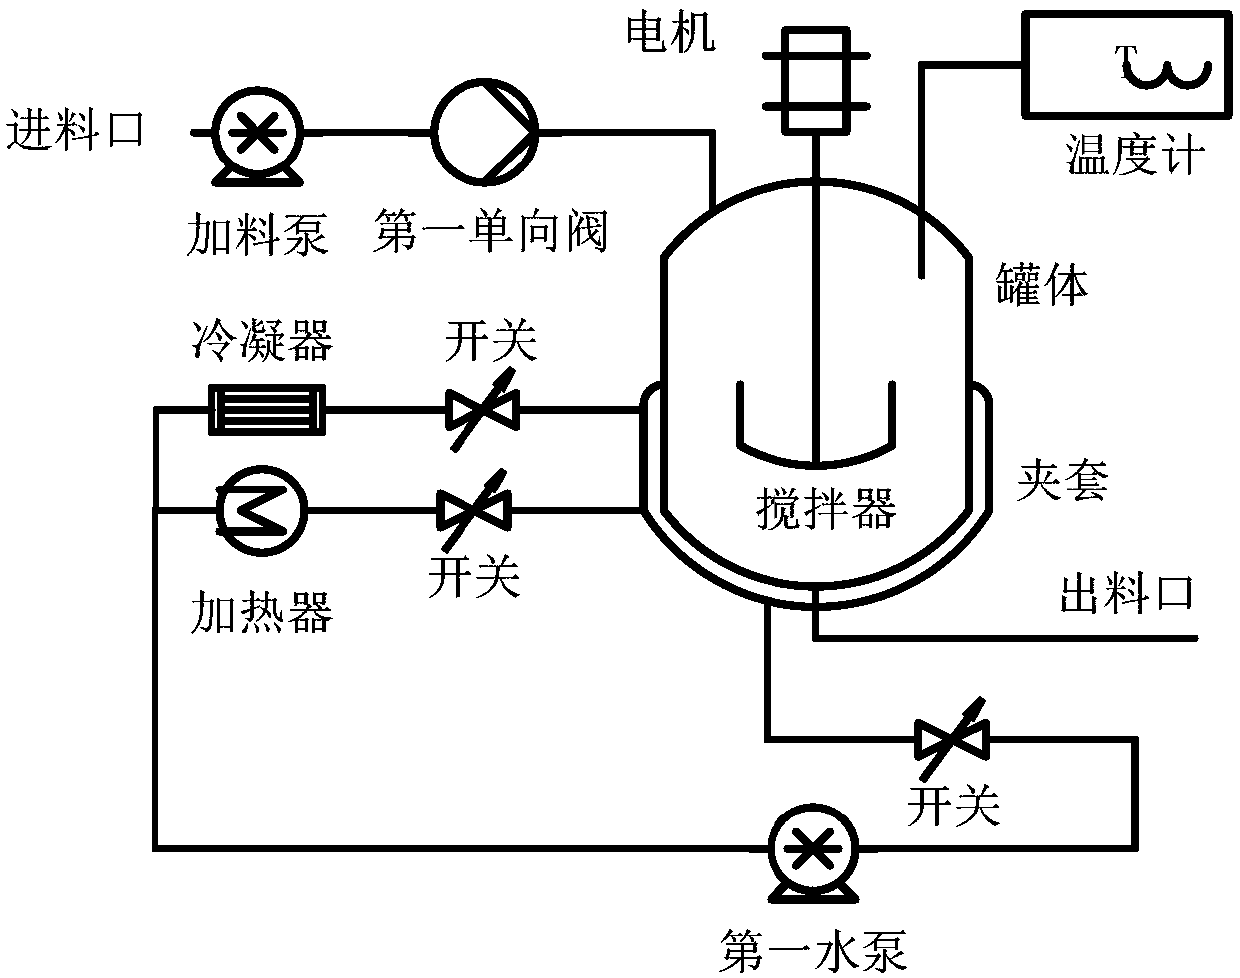 Chemical mechanical system with T-type paddle horizontal reactor